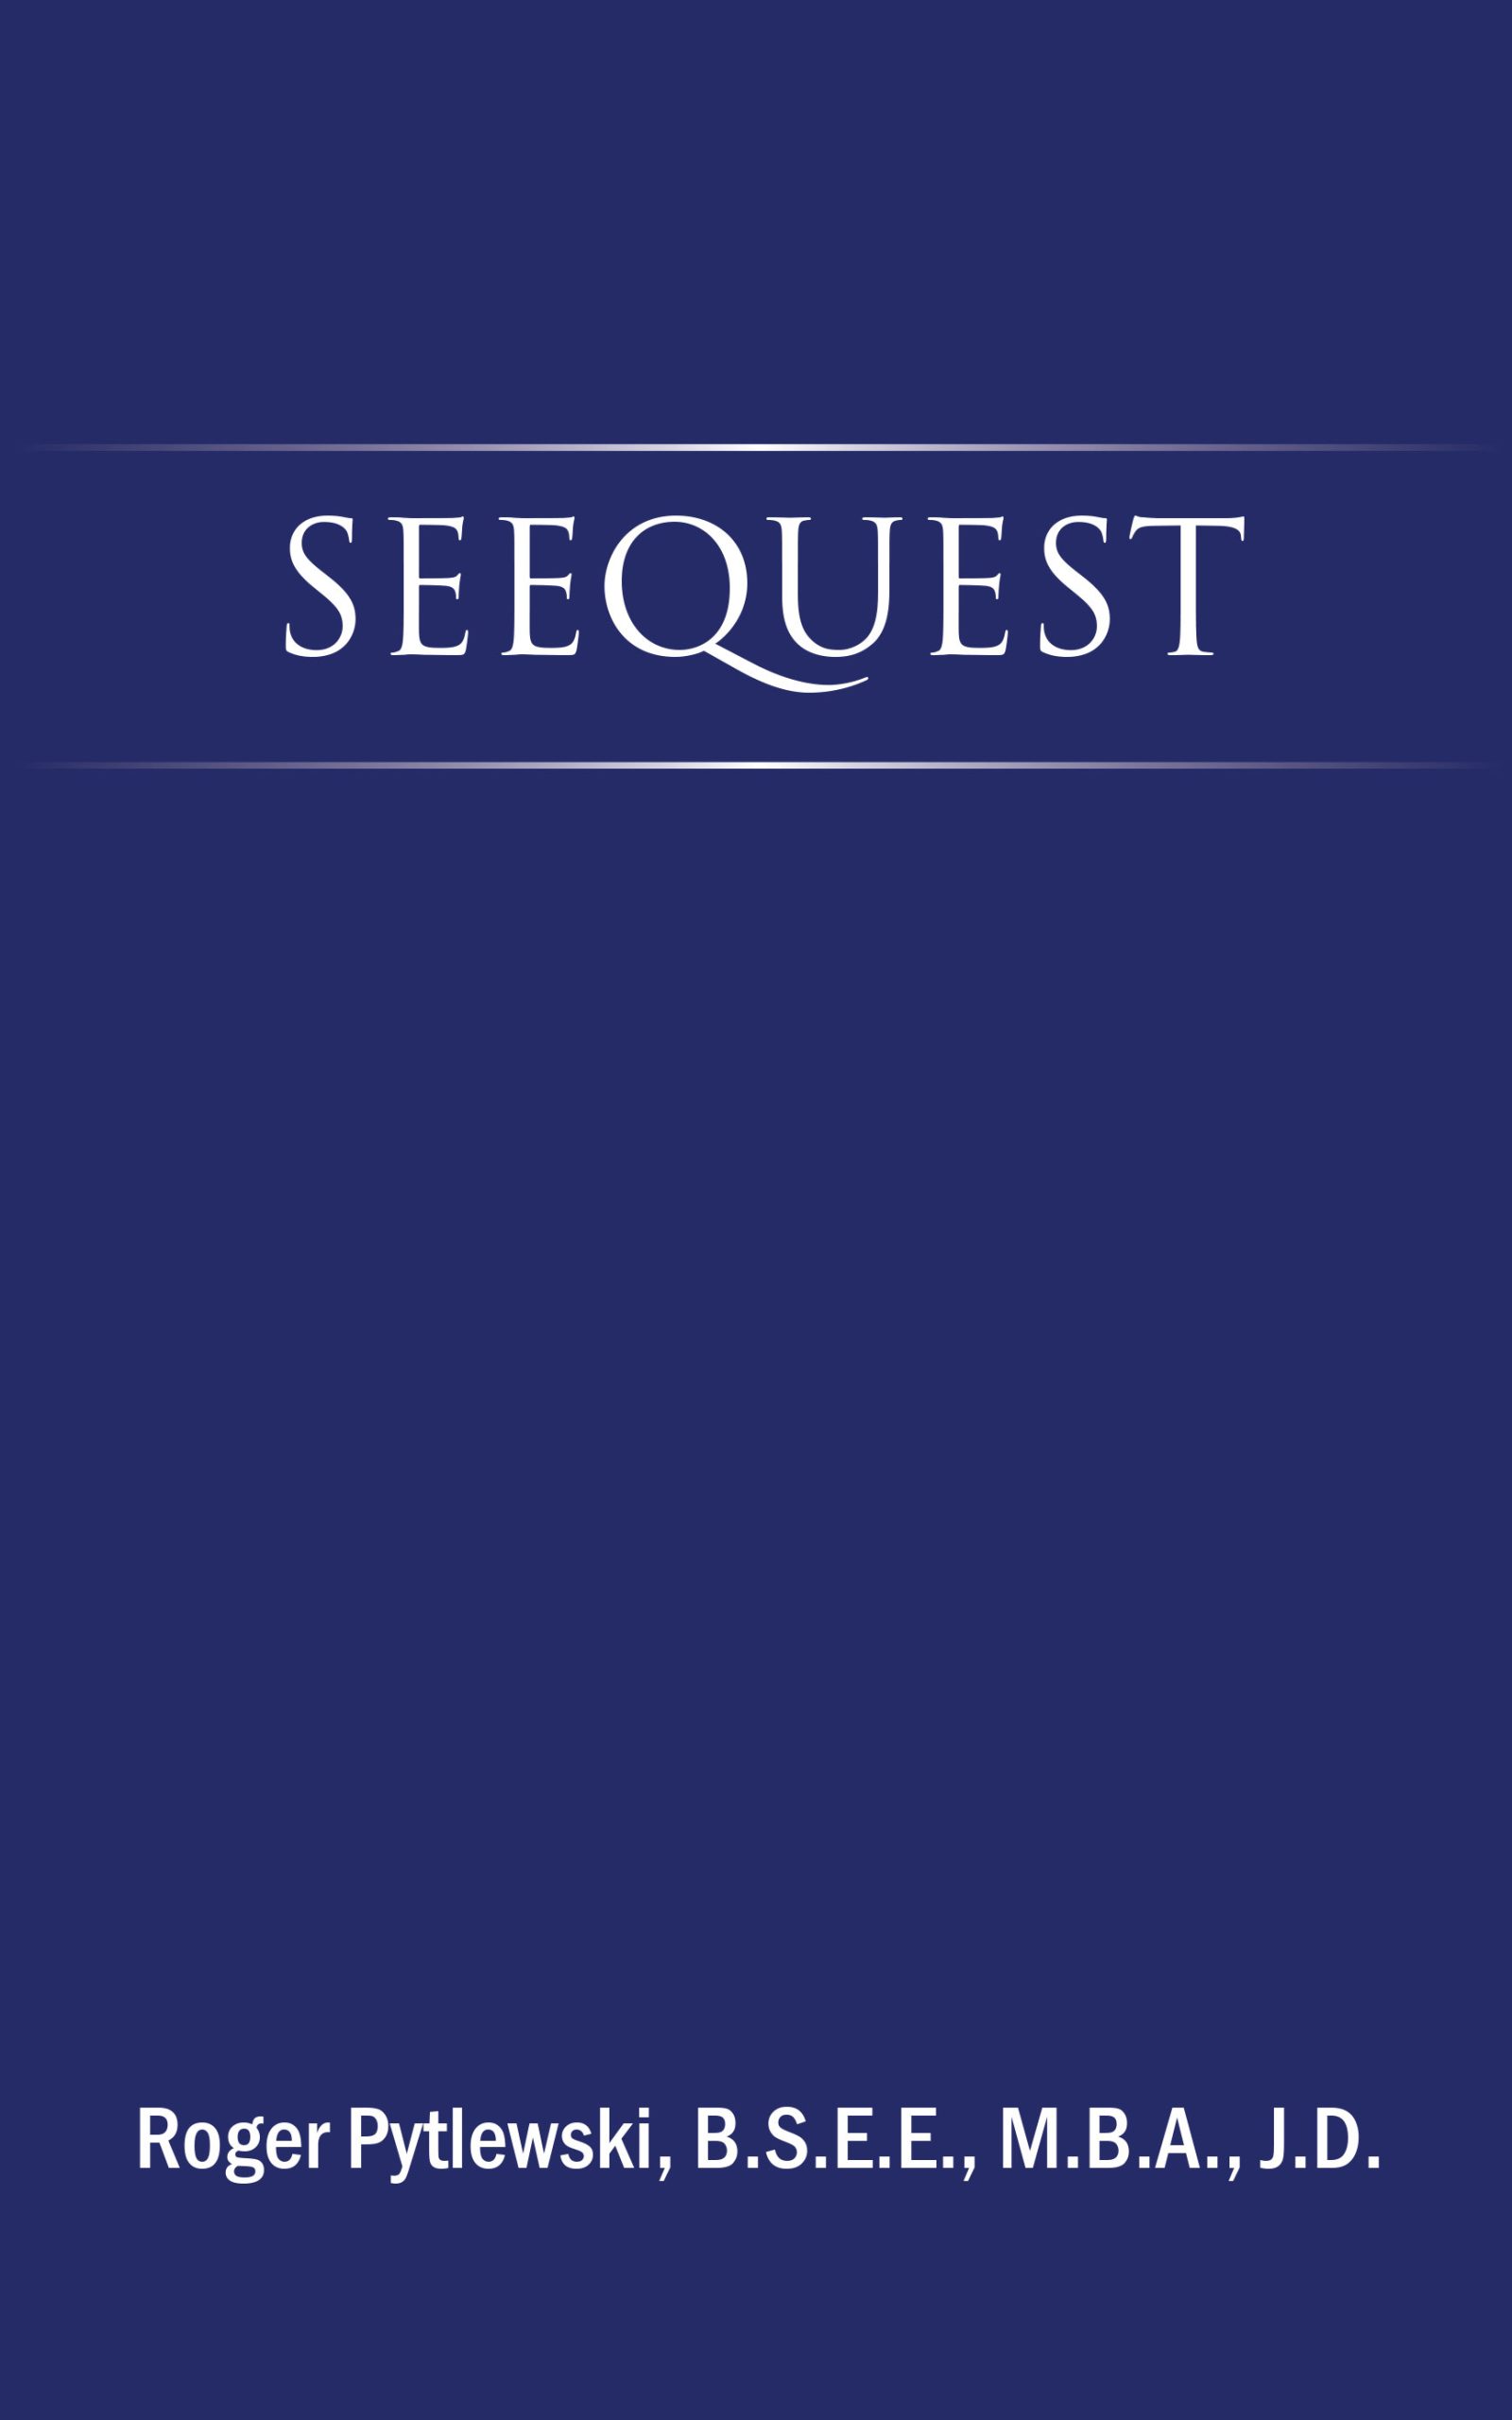 SEEQUEST/